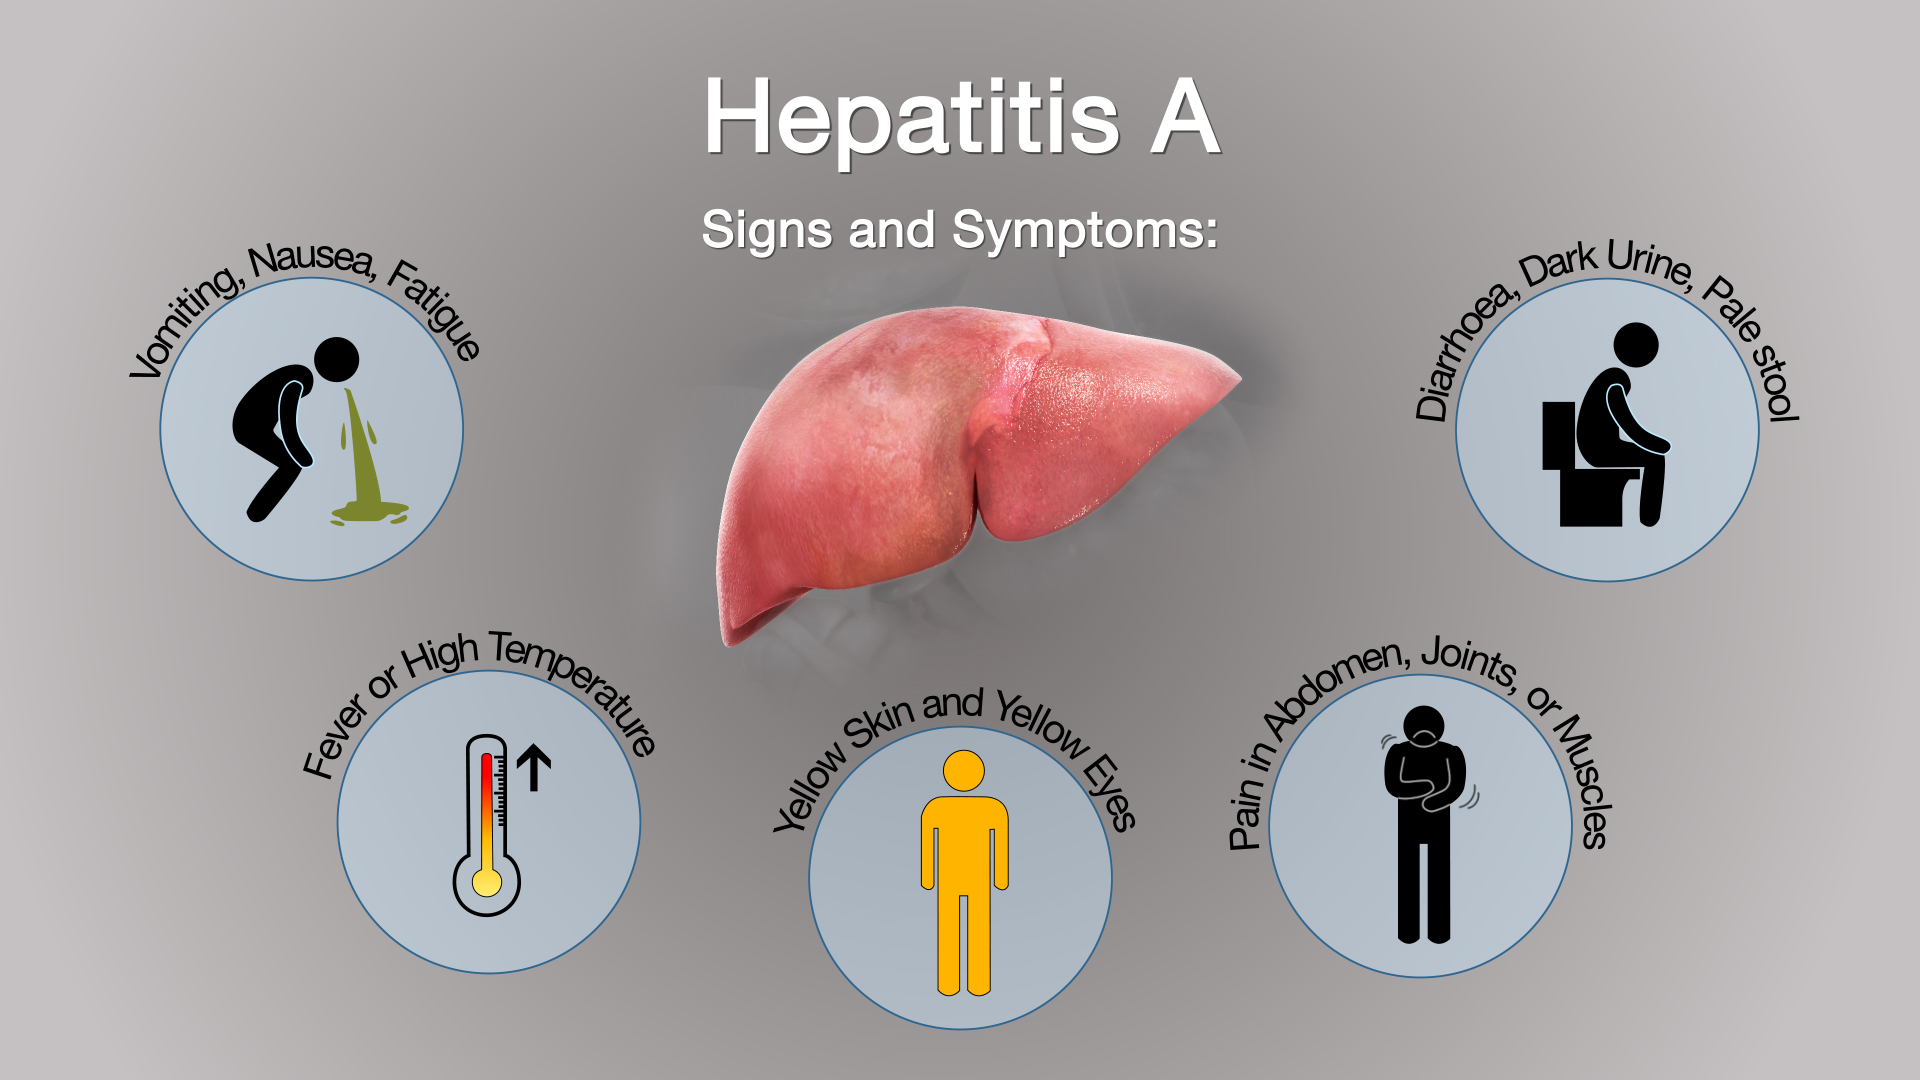 Hepatitis A: Symptoms, Causes, and Treatment